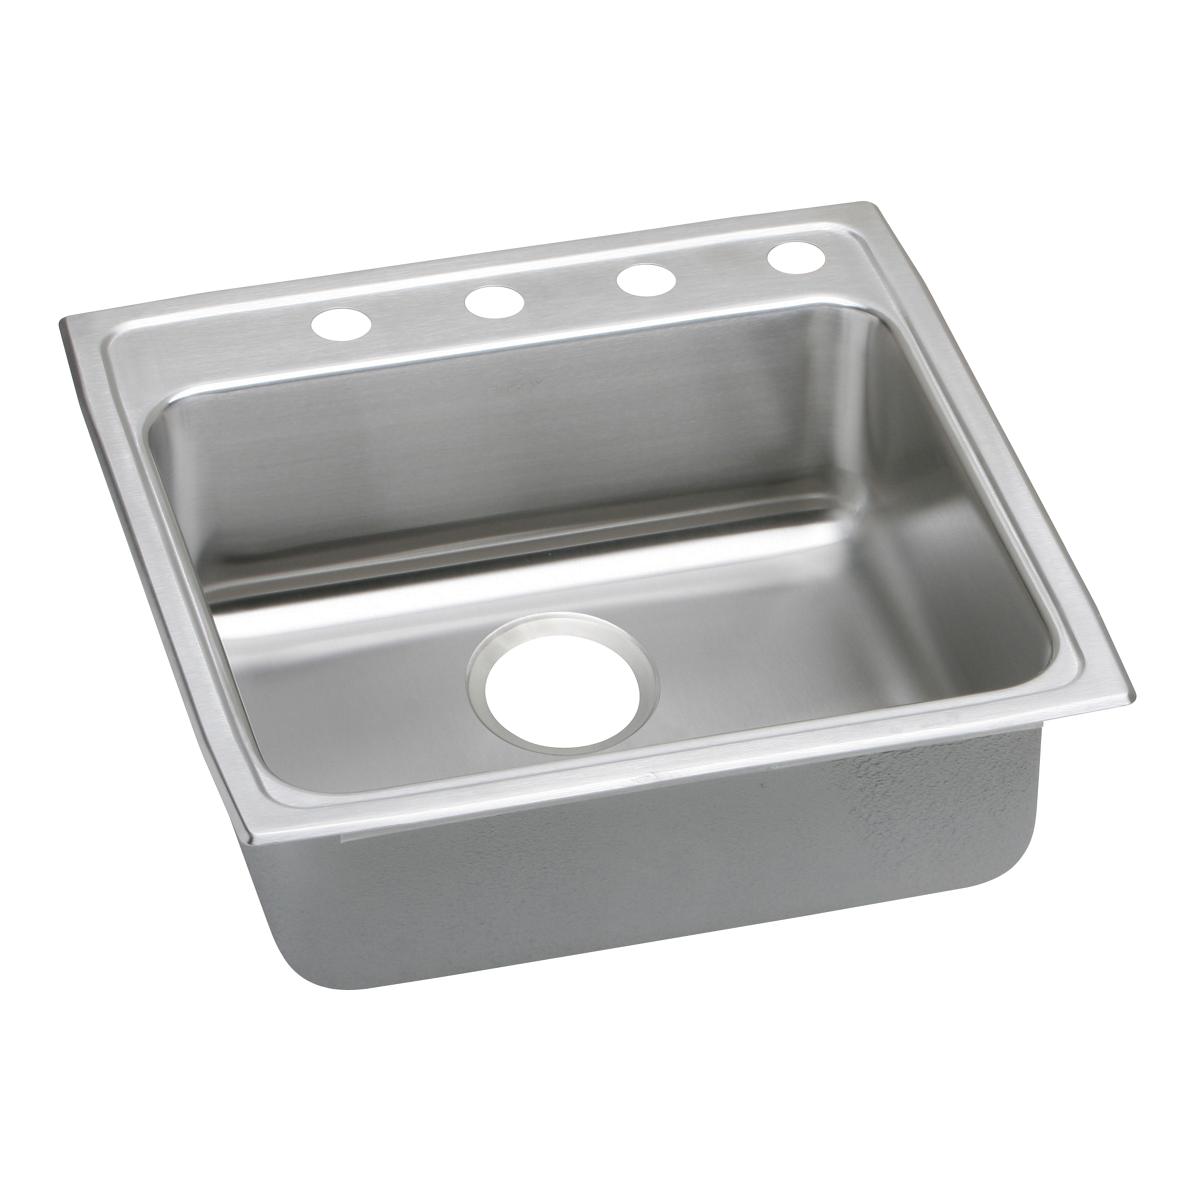 Elkay Lustertone Classic 22" x 22" x 5-1/2" MR2-Hole Single Bowl Drop-in ADA Sink with Quick-clip